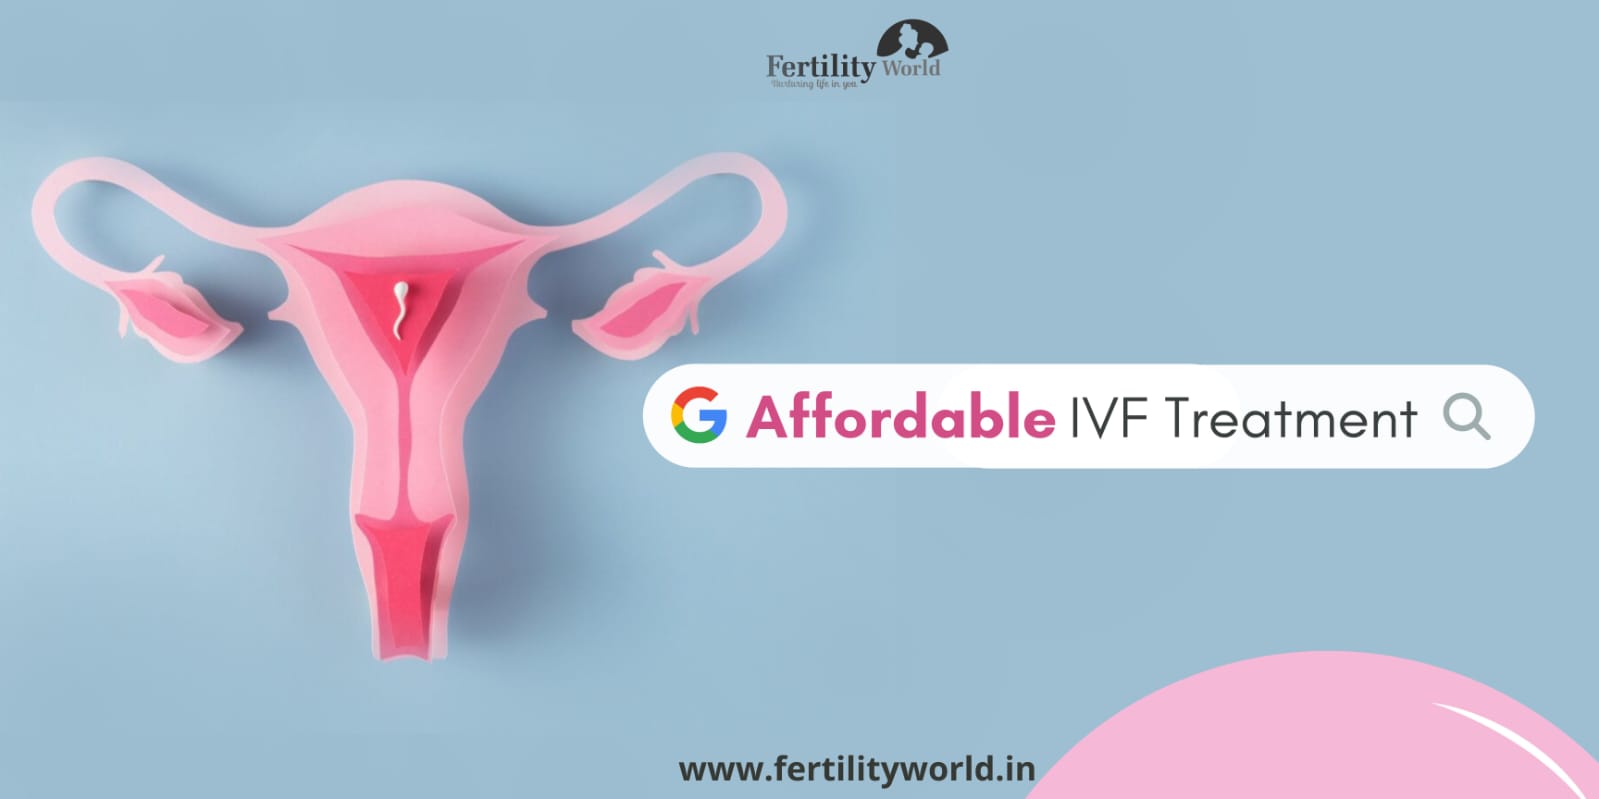 Low-cost IVF treatment in Noida